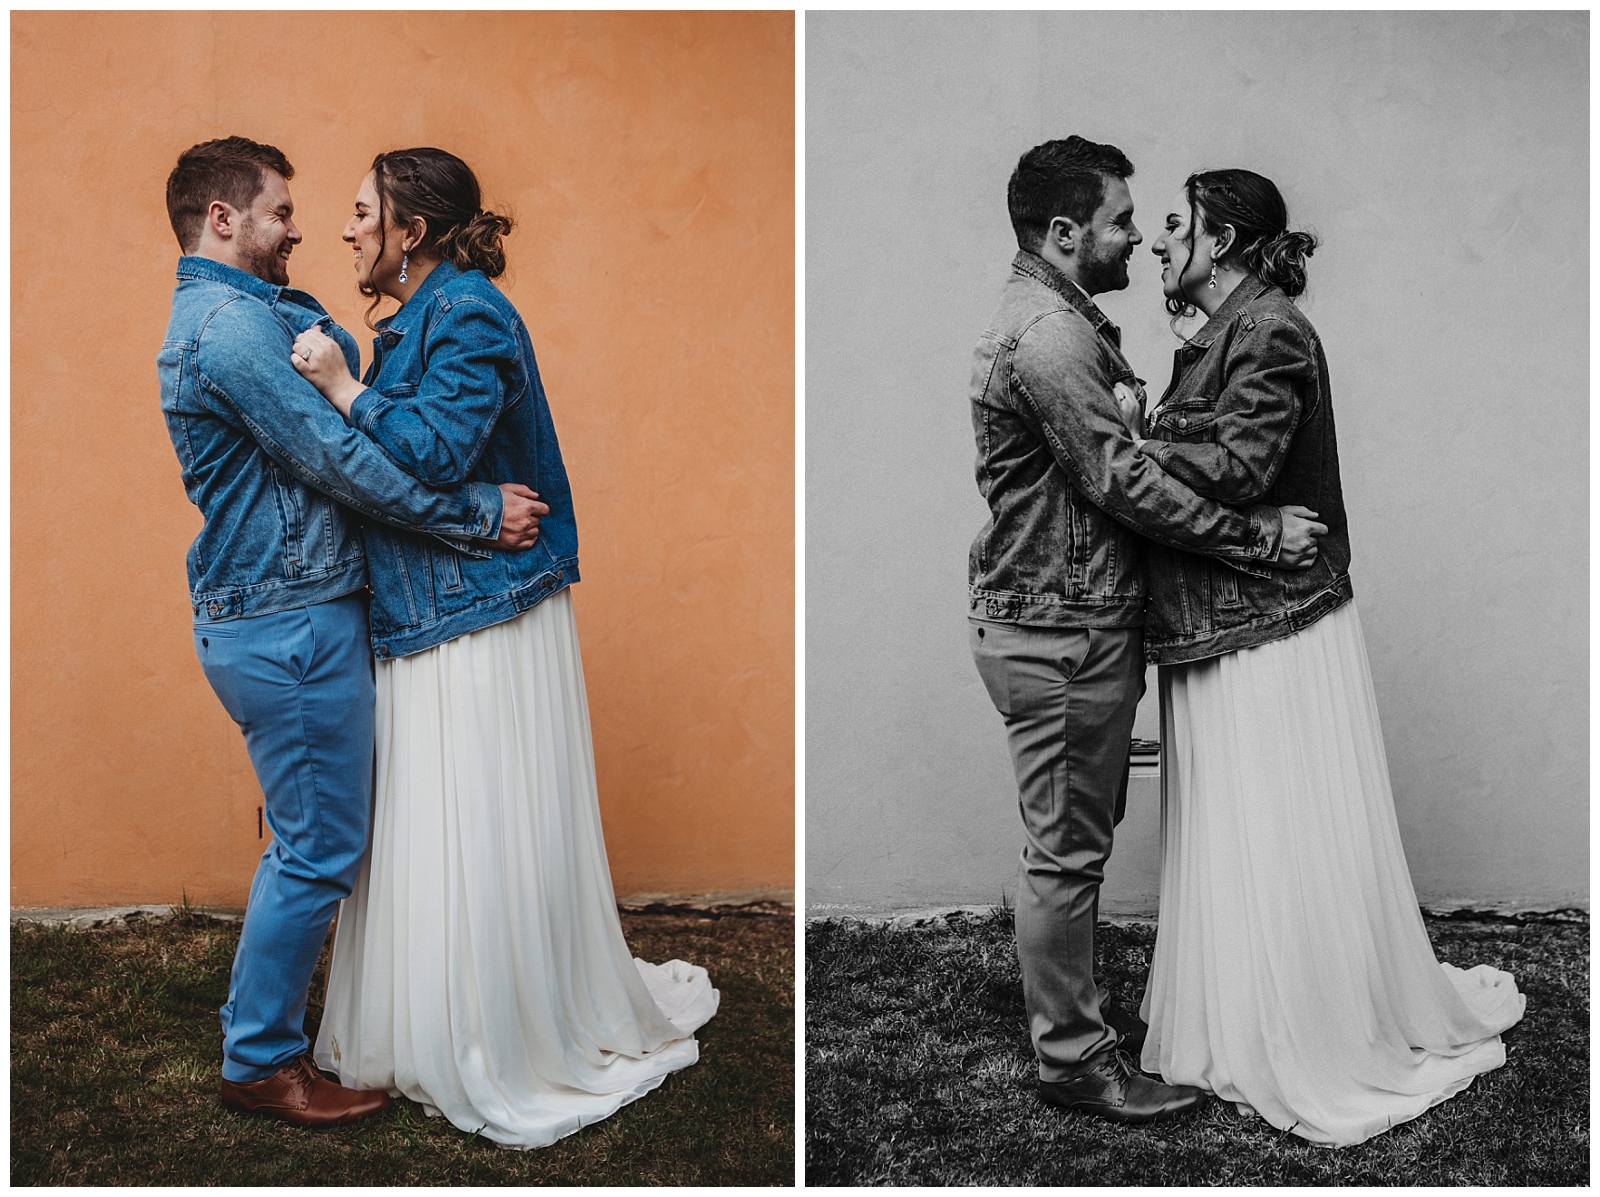 Full length view Bride and Groom wearing denim jackets facing each other smiling and giggling.